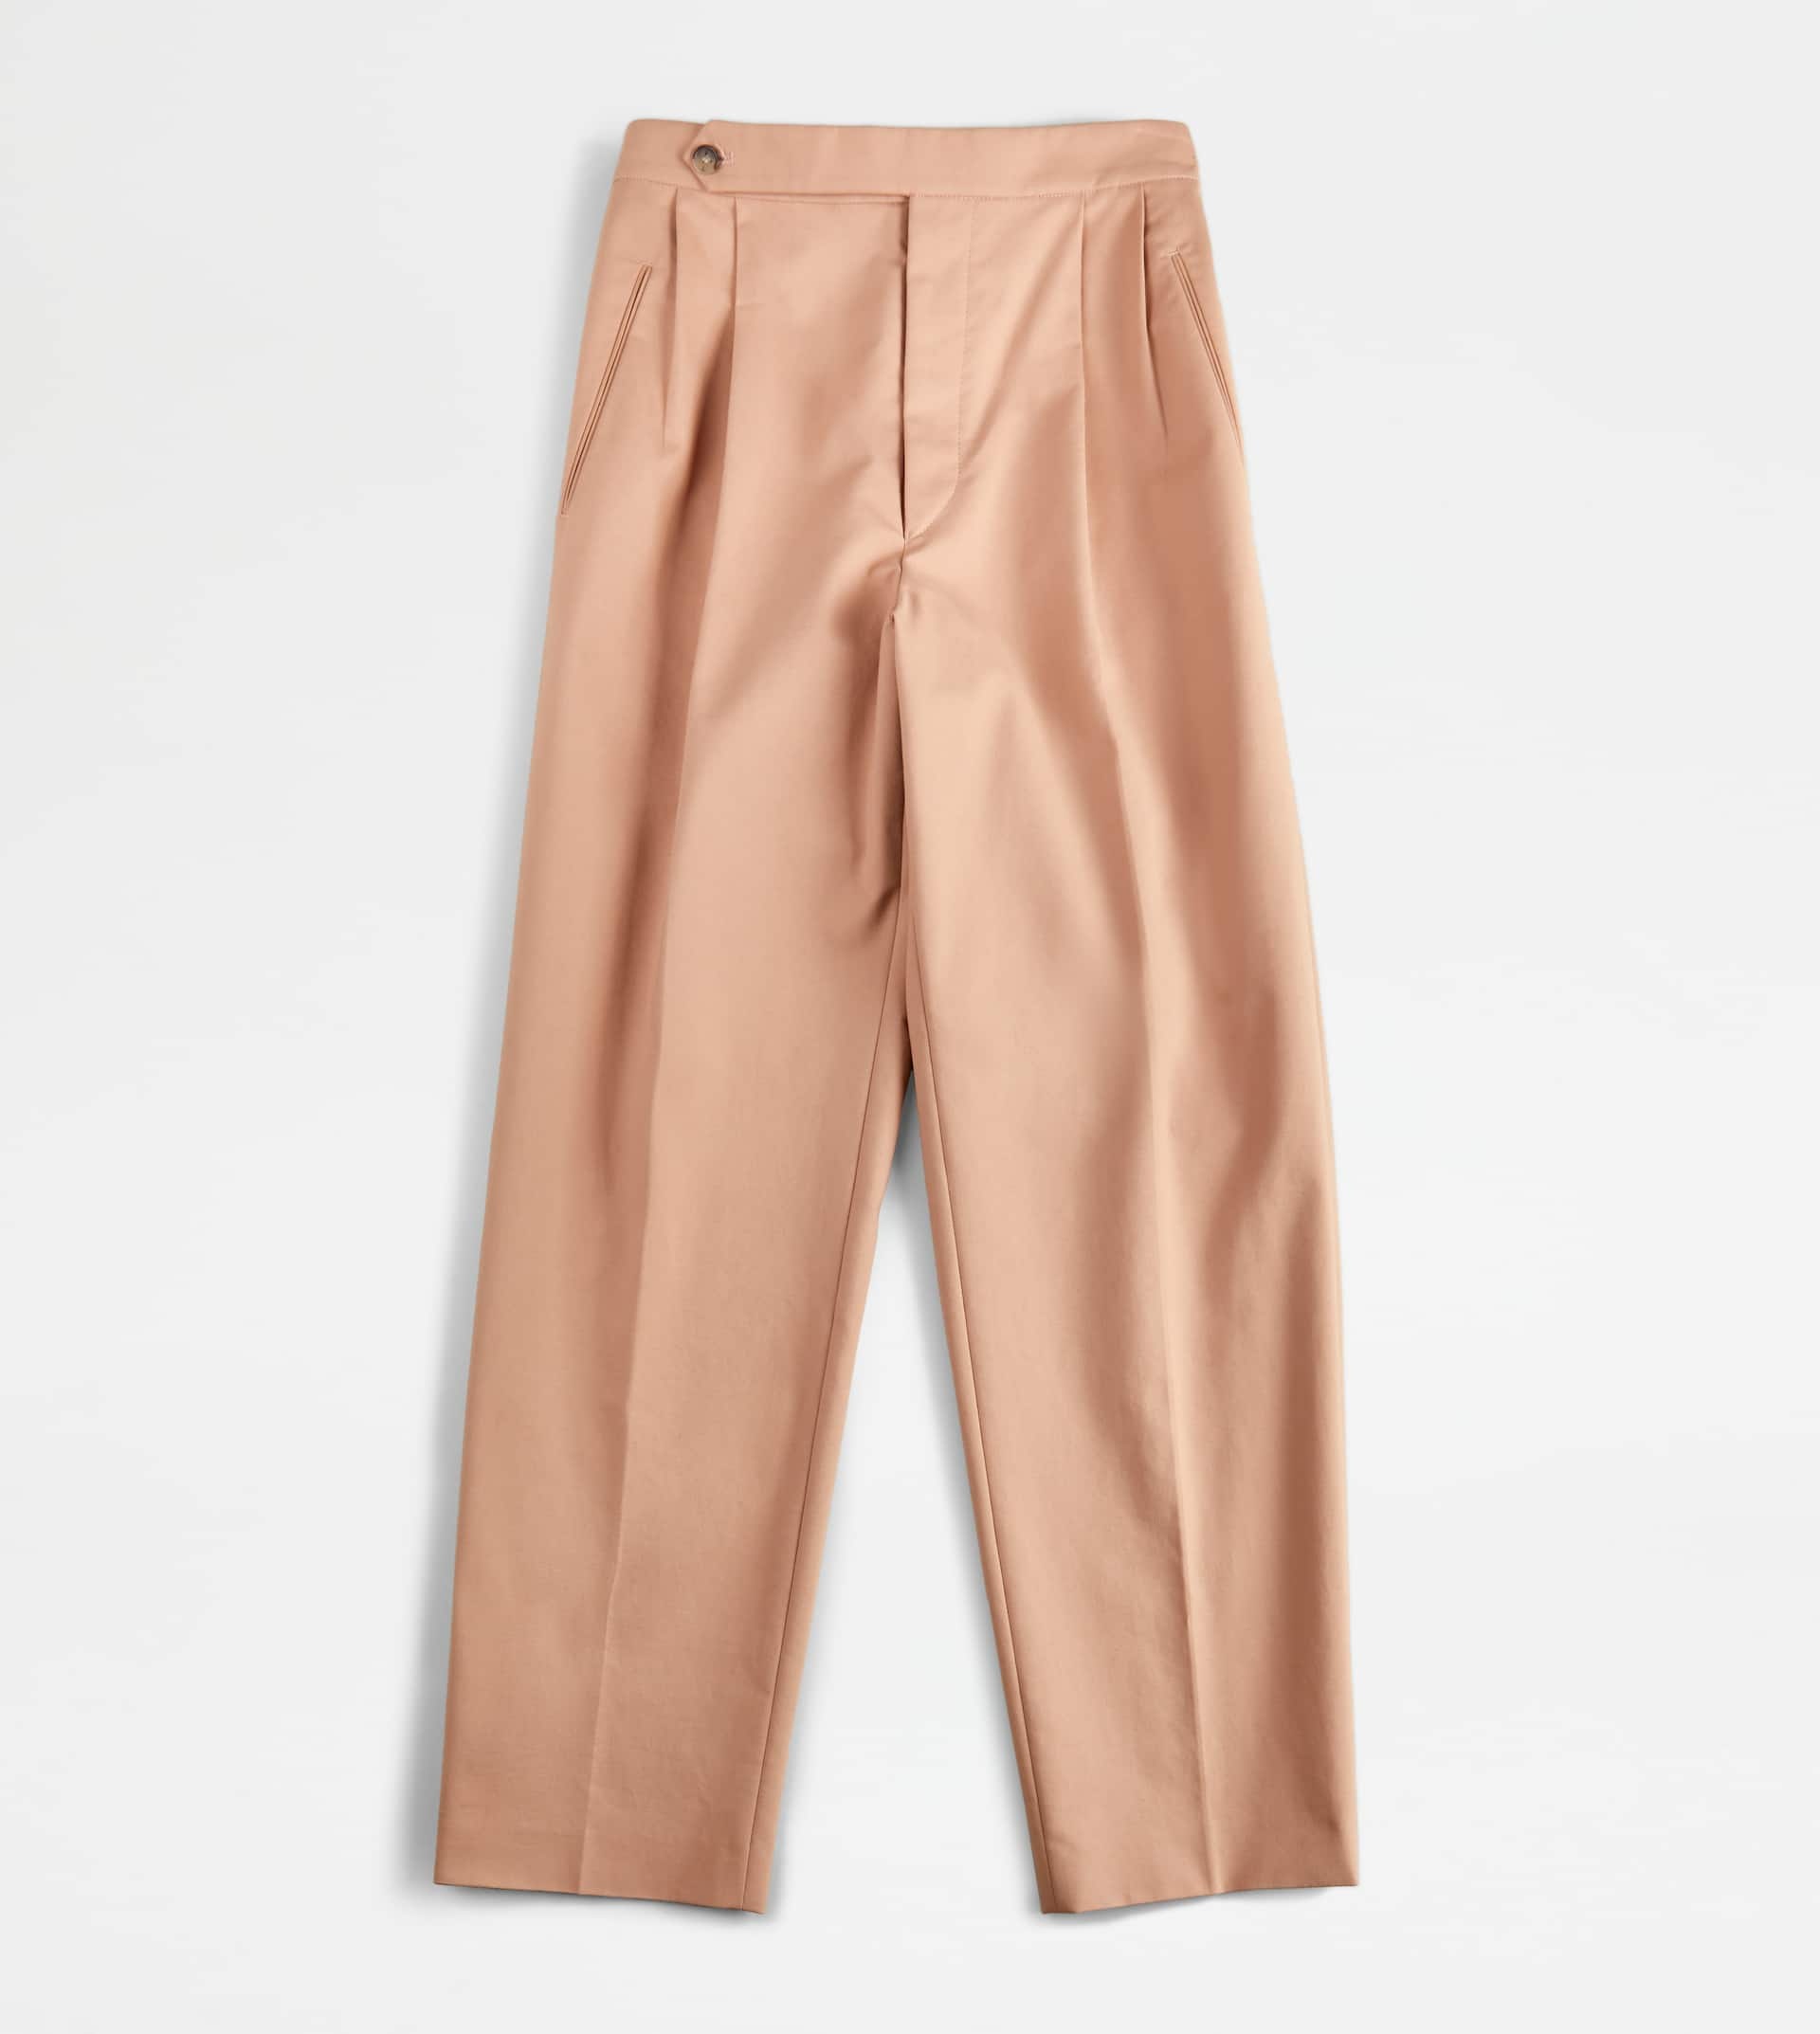 PANTS IN STRETCH COTTON - BEIGE - 1